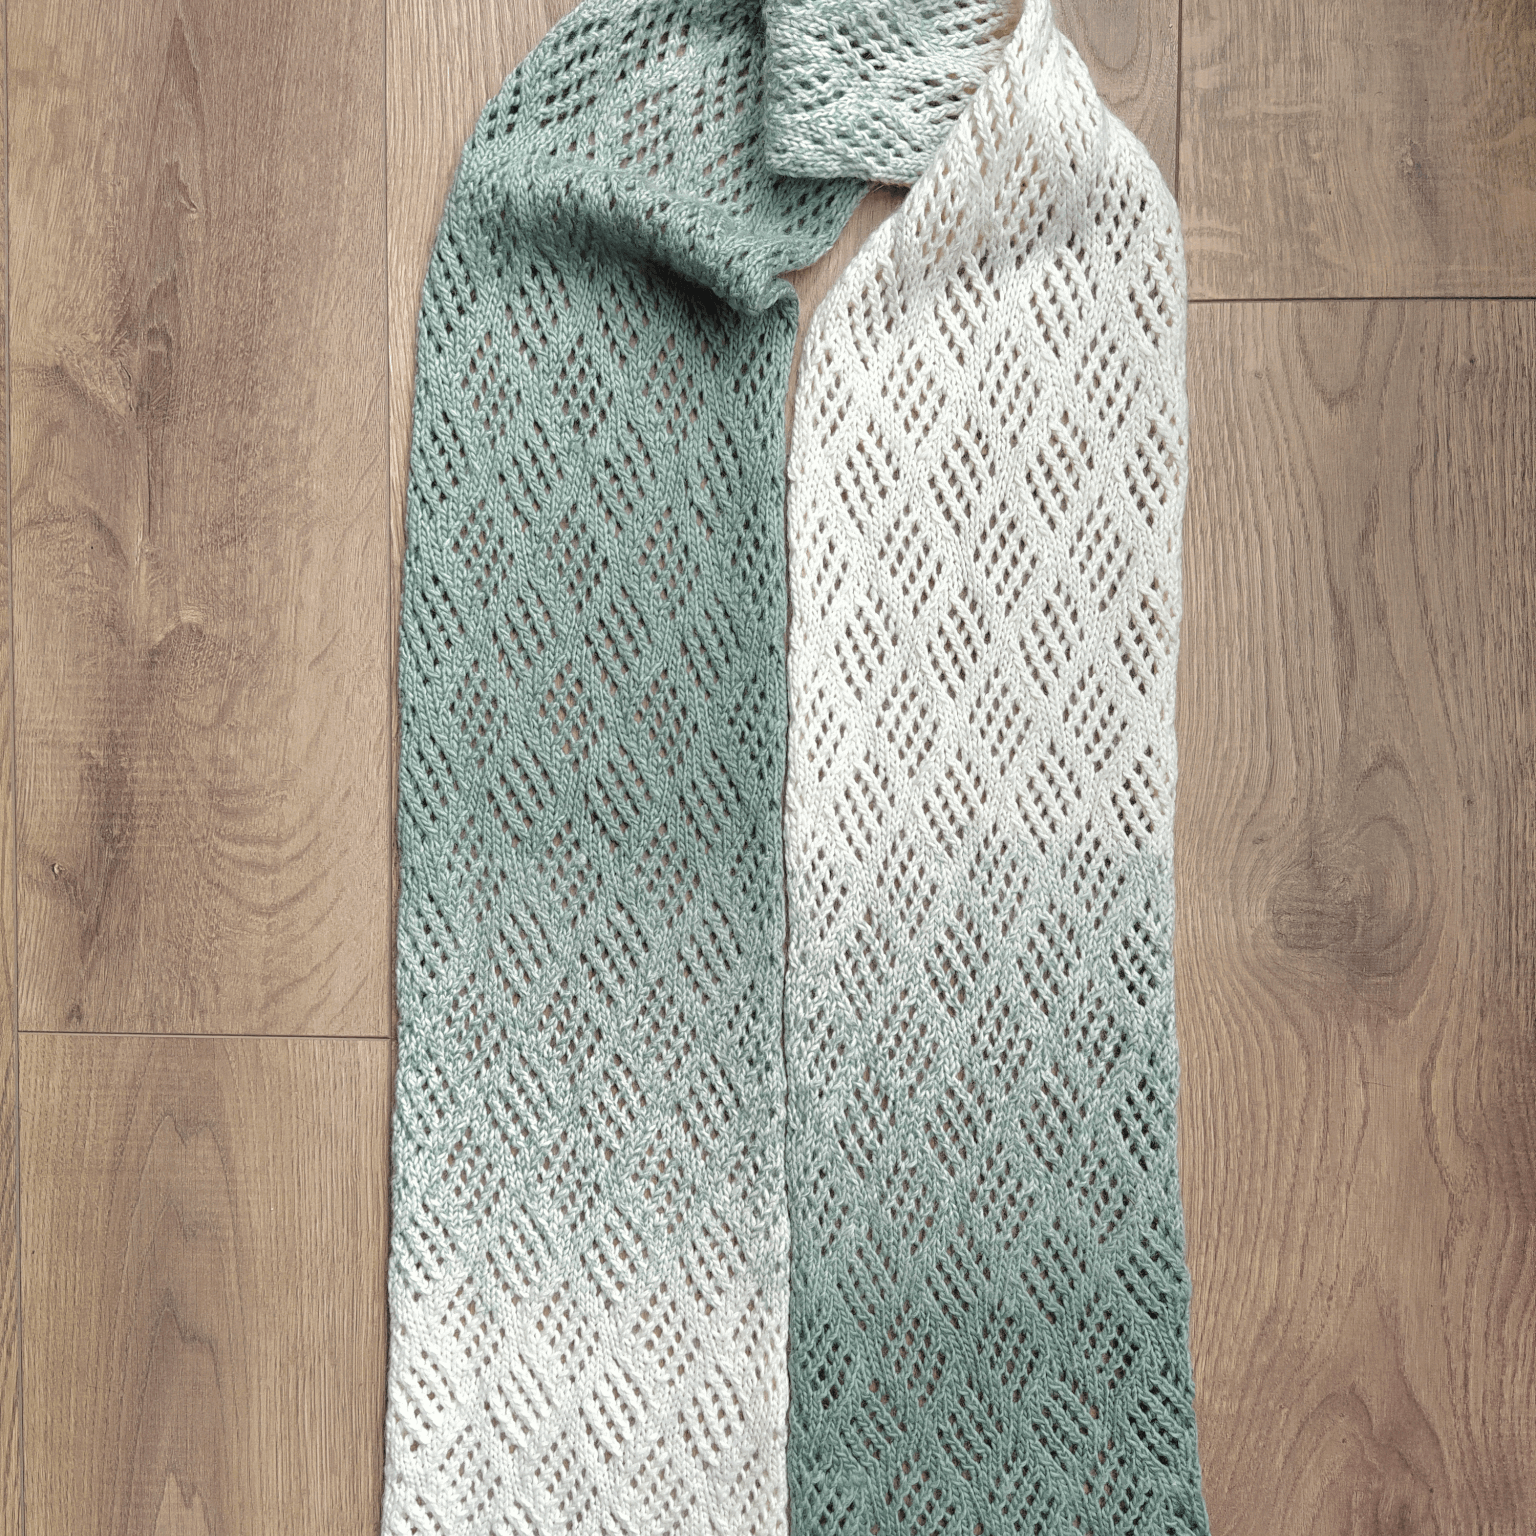 Flatlay of Checkerboard lace scarf by Purl Soho. Knit by Knitq.